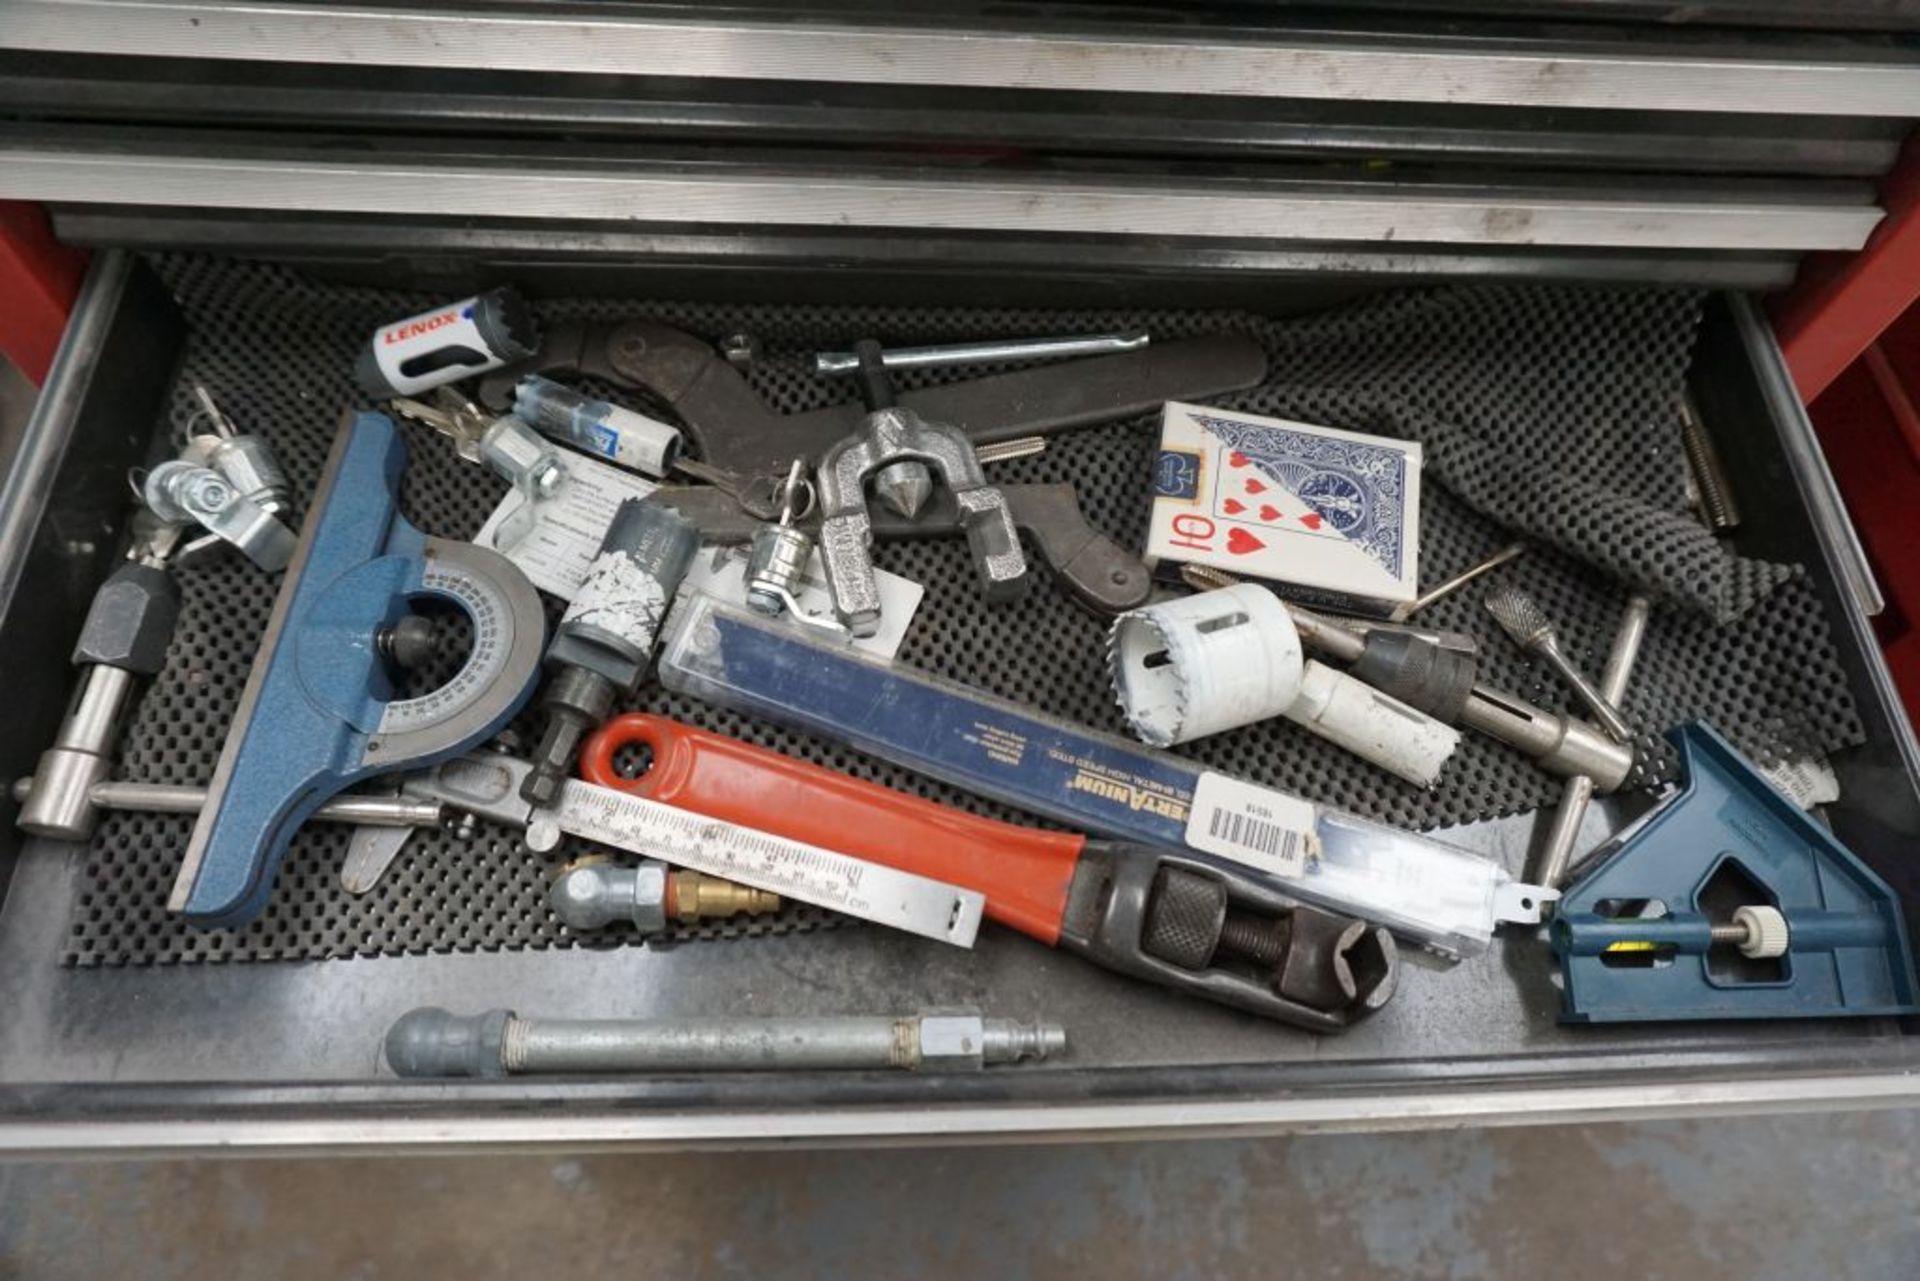 Craftsman Rolling Toolbox w/Contents - Image 7 of 13